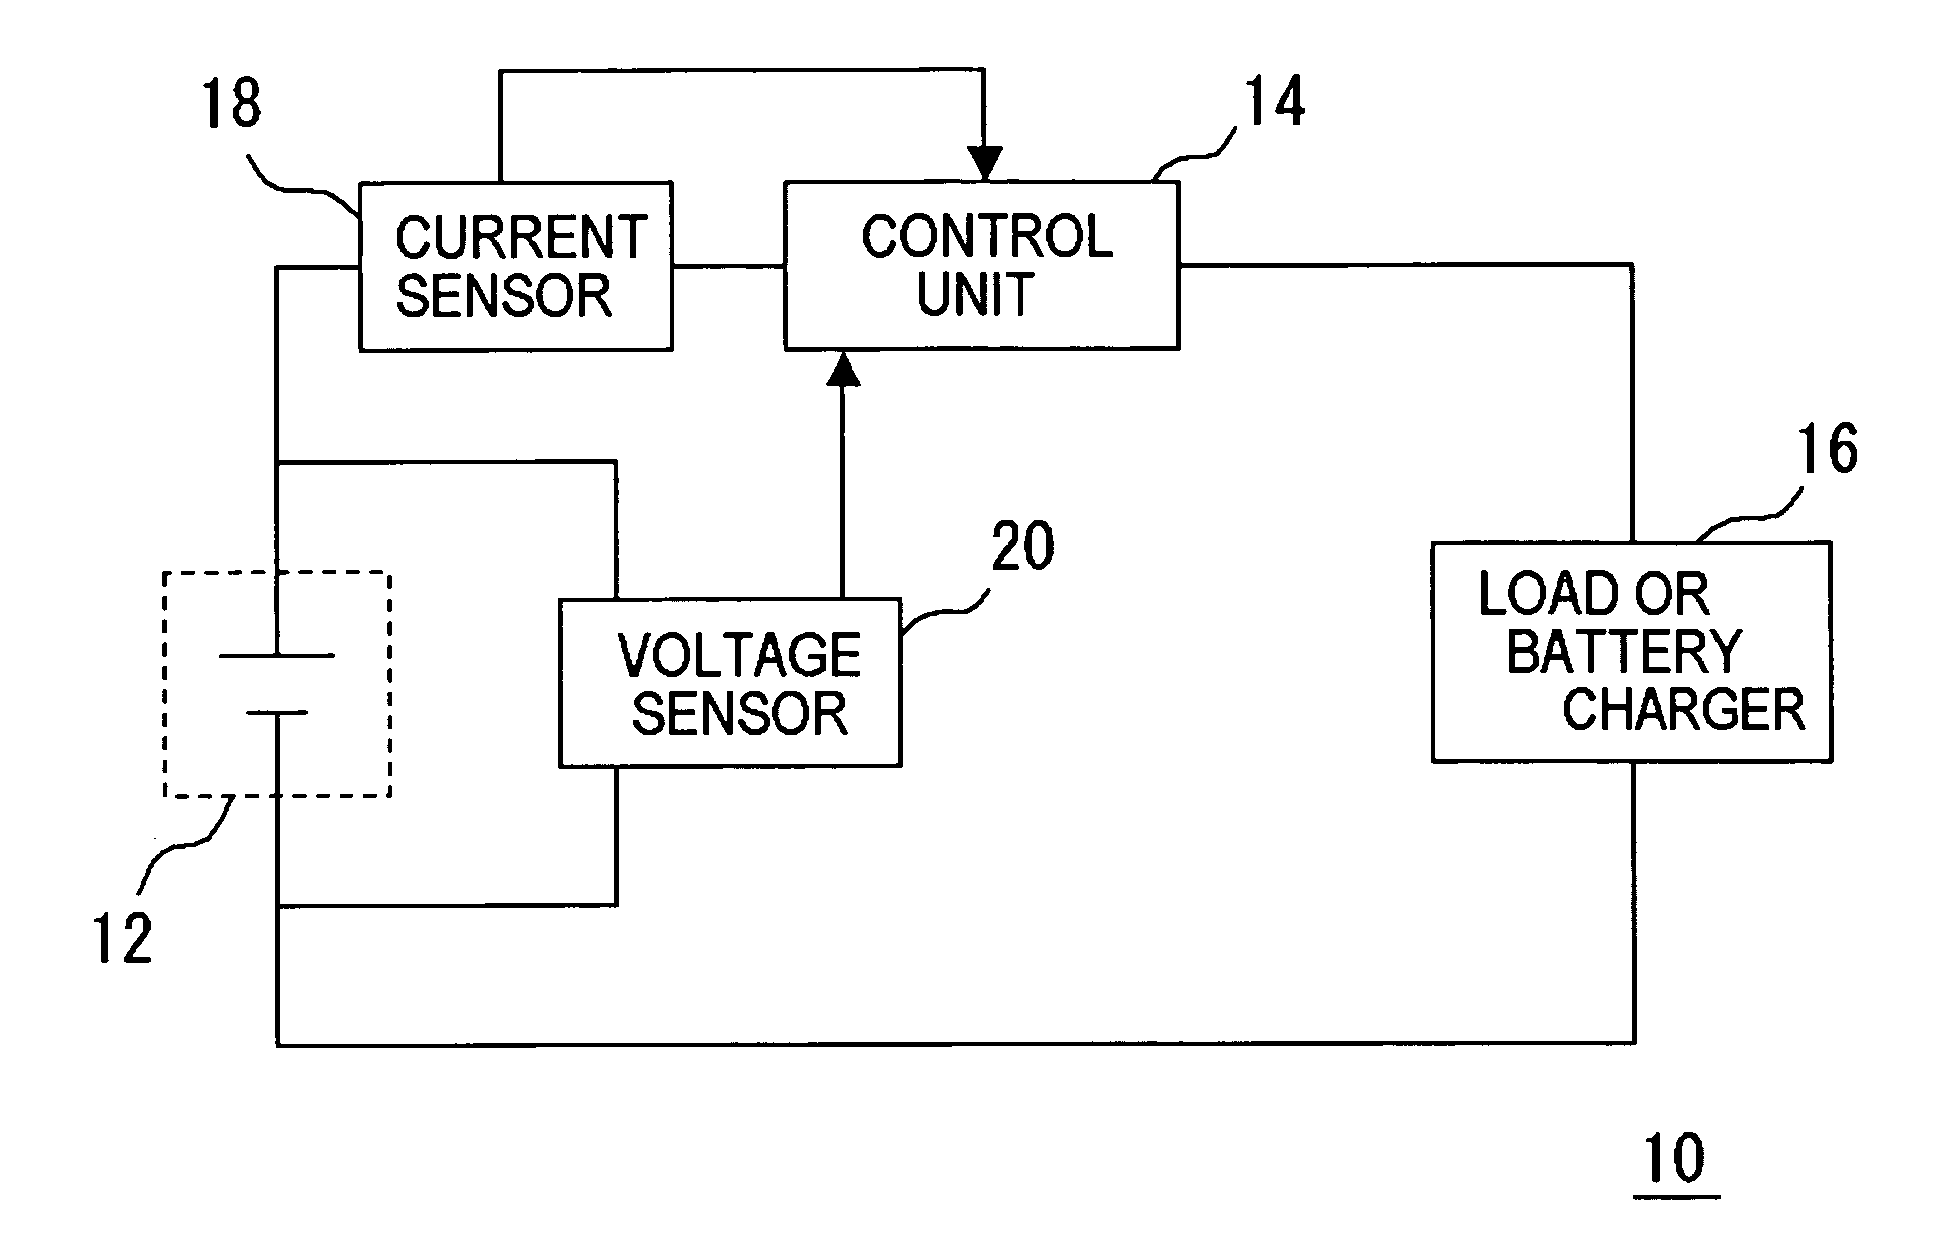 Lithium ion secondary battery system, and method for operating lithium ion secondary battery